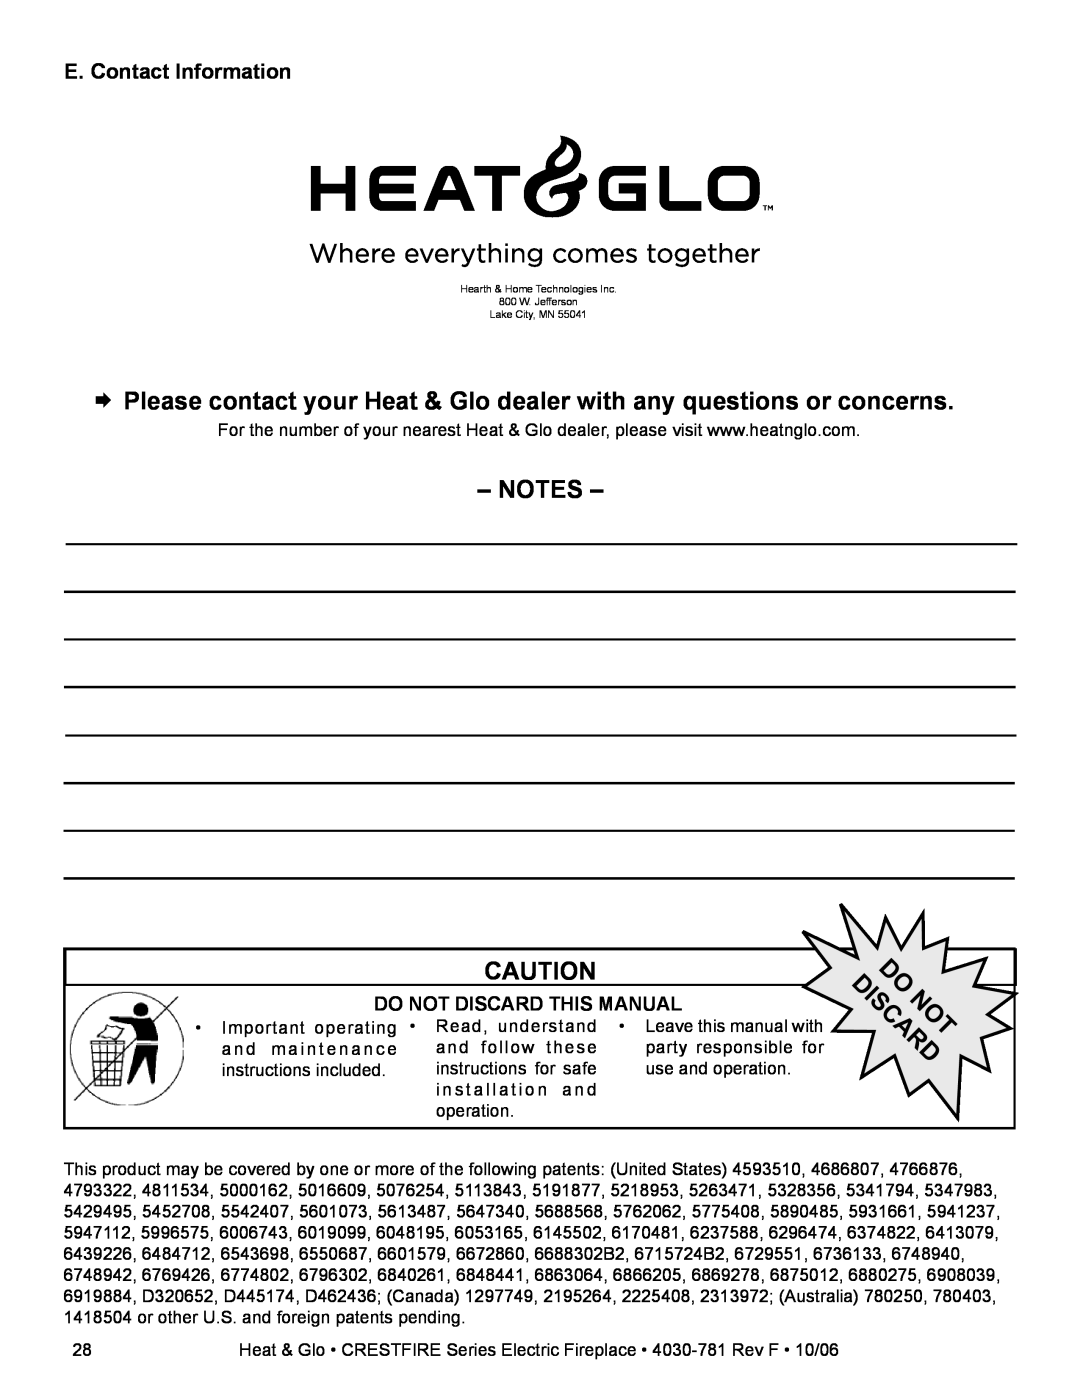 Heat & Glo LifeStyle CF550E-B owner manual E. Contact Information, Do Not Discard This Manual 